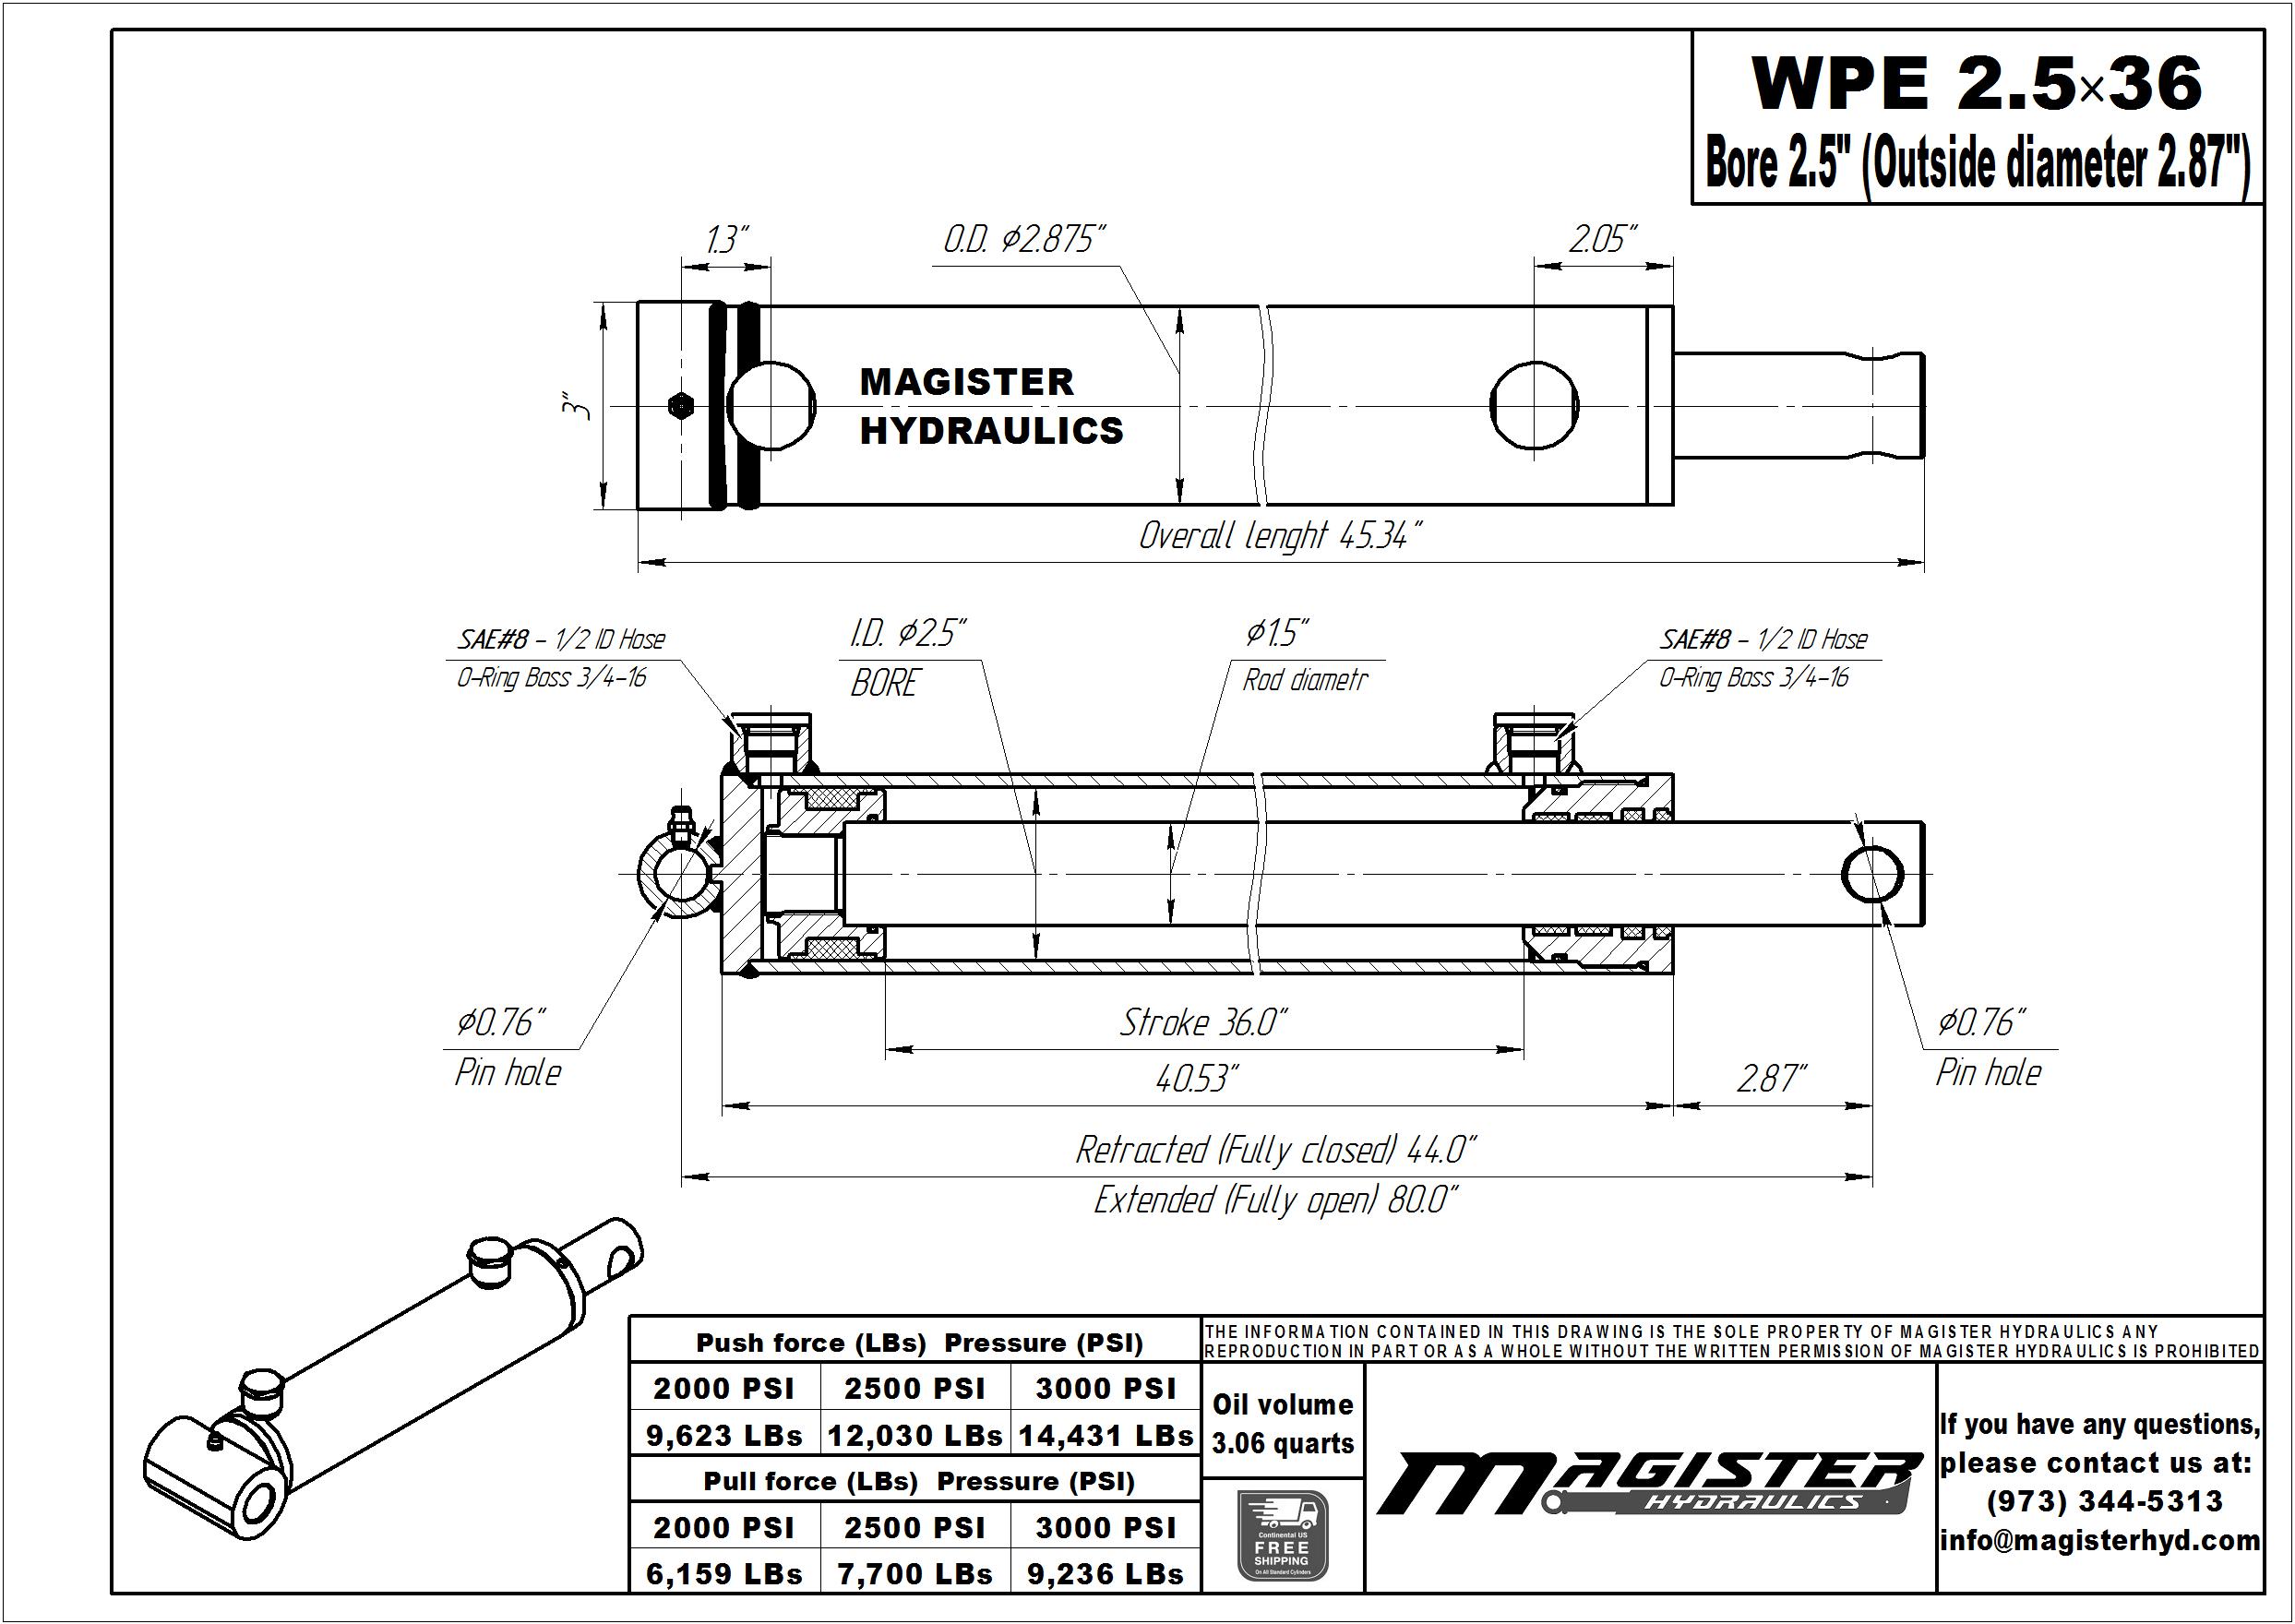 2.5 bore x 36 stroke hydraulic cylinder, welded pin eye double acting cylinder | Magister Hydraulics